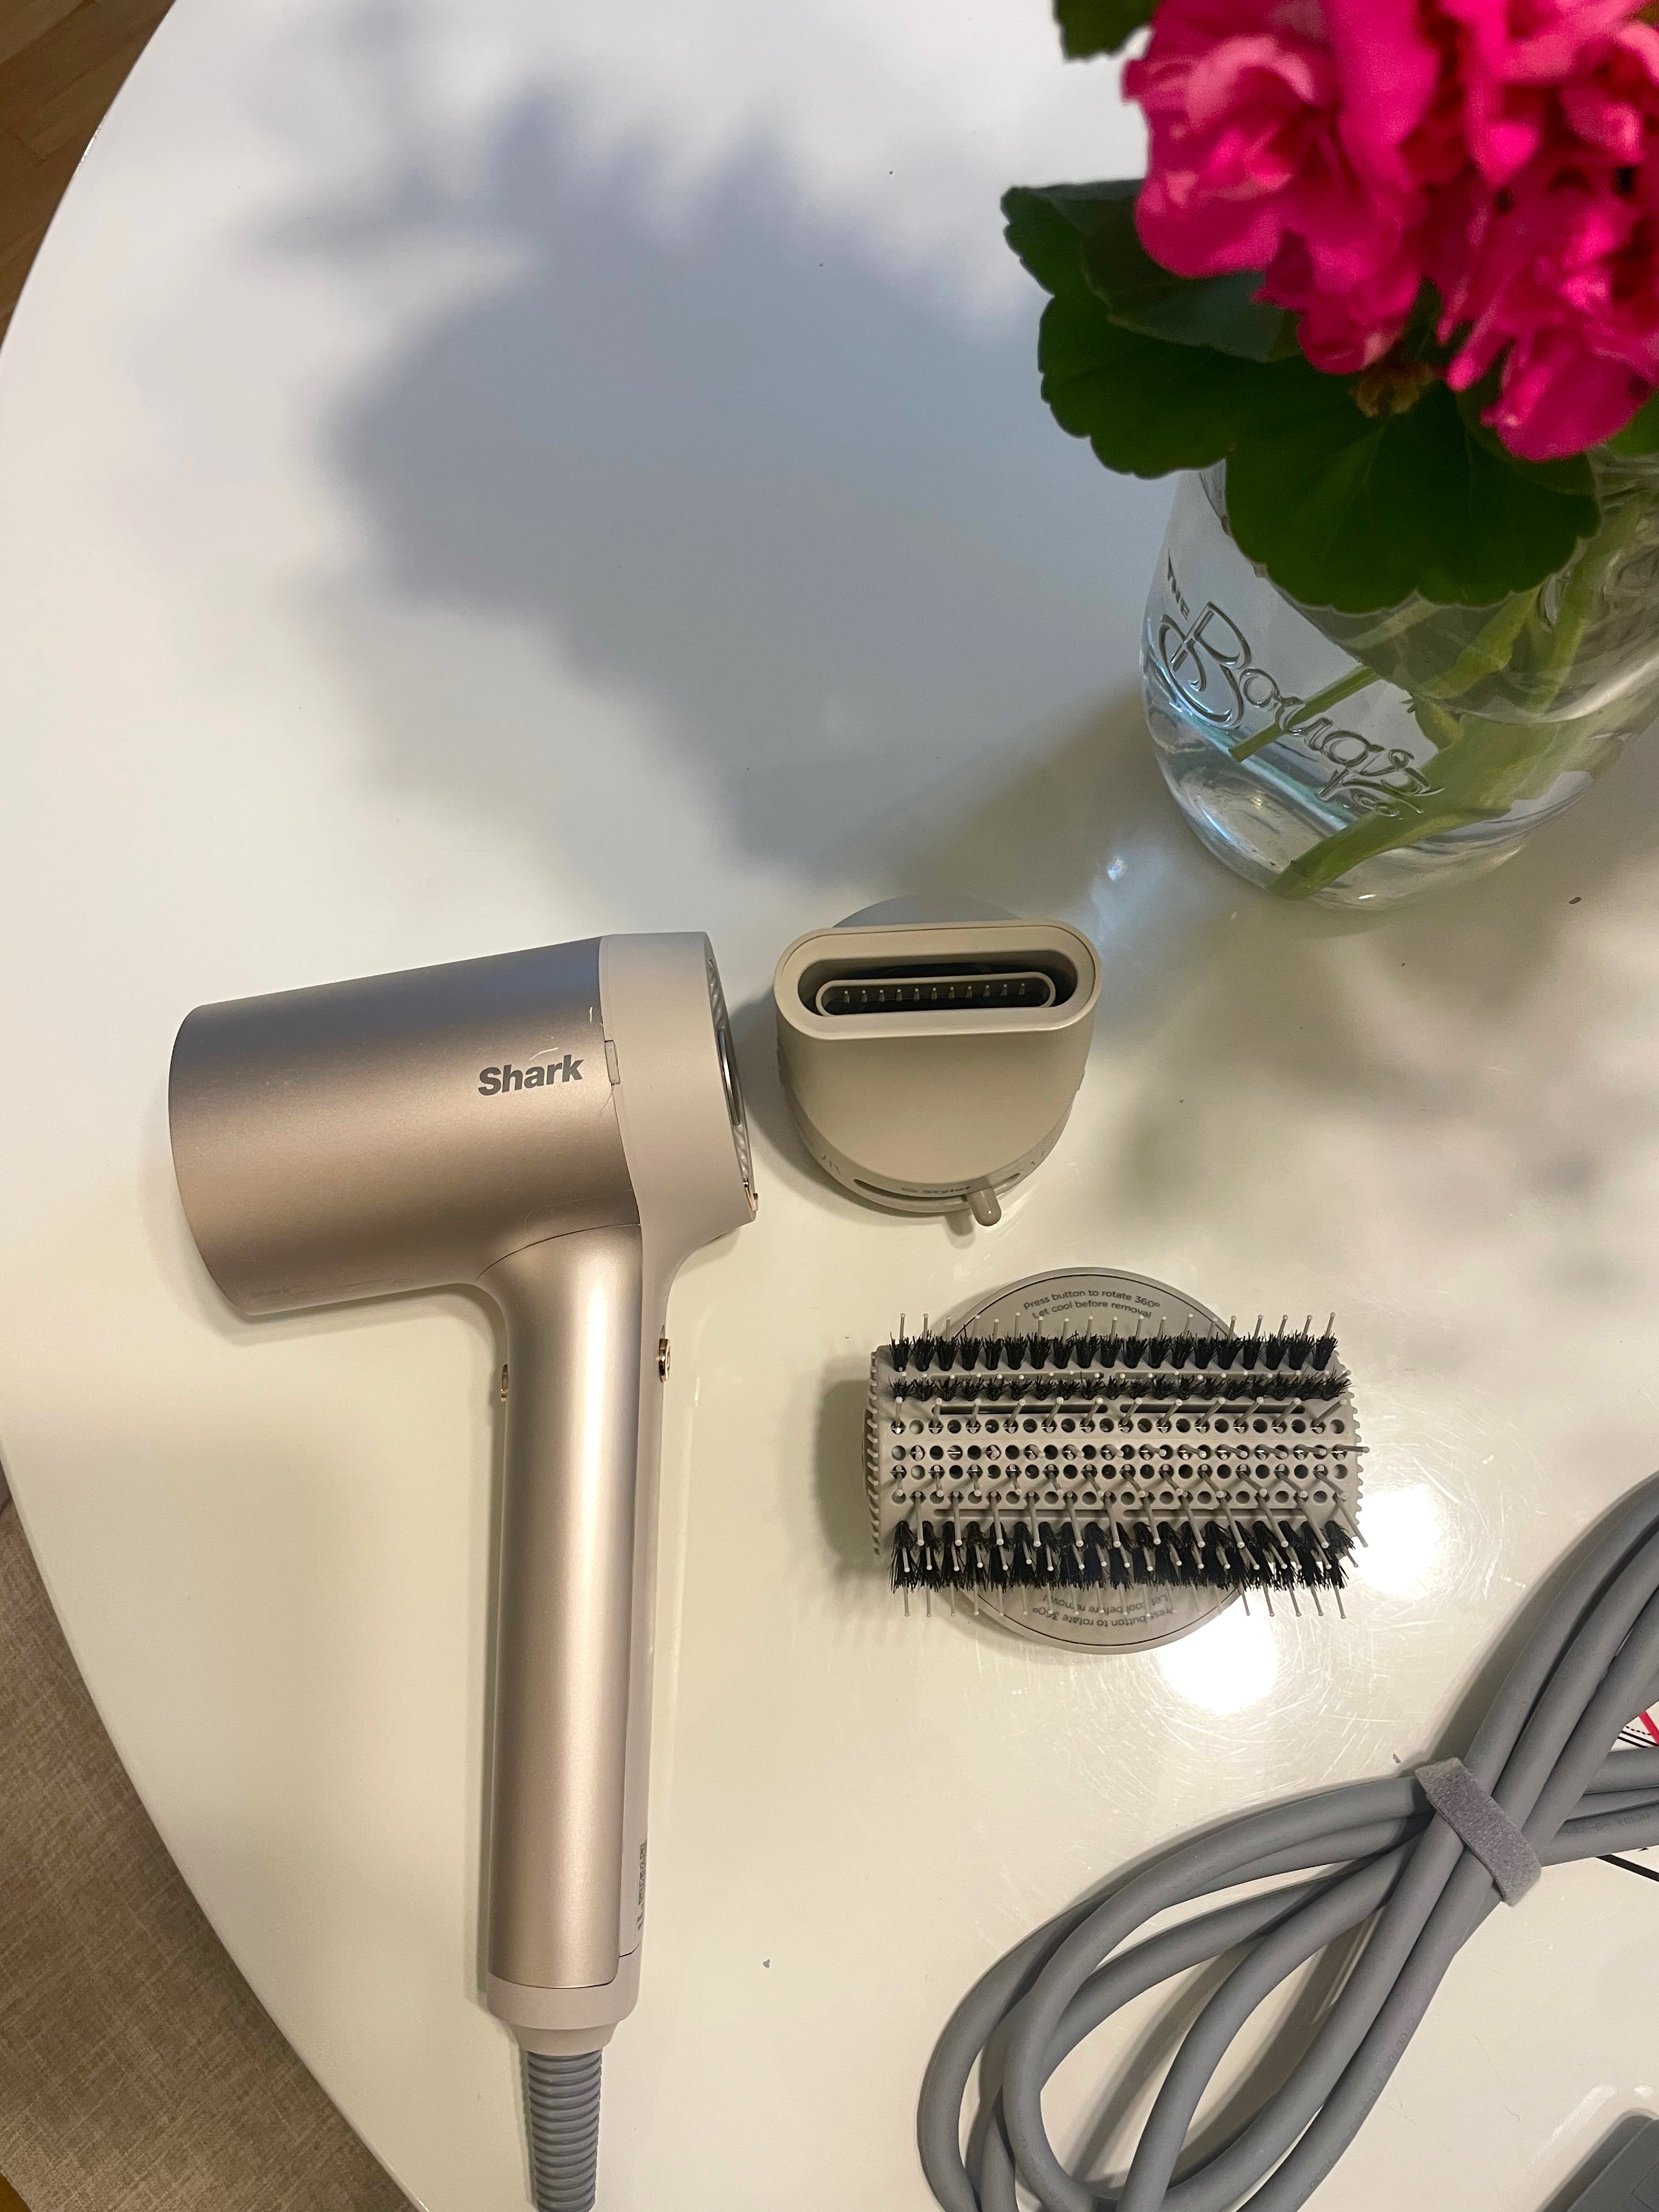 Shark's FlexStyle Dryer Will Give You TikTok Hair for Half the Price